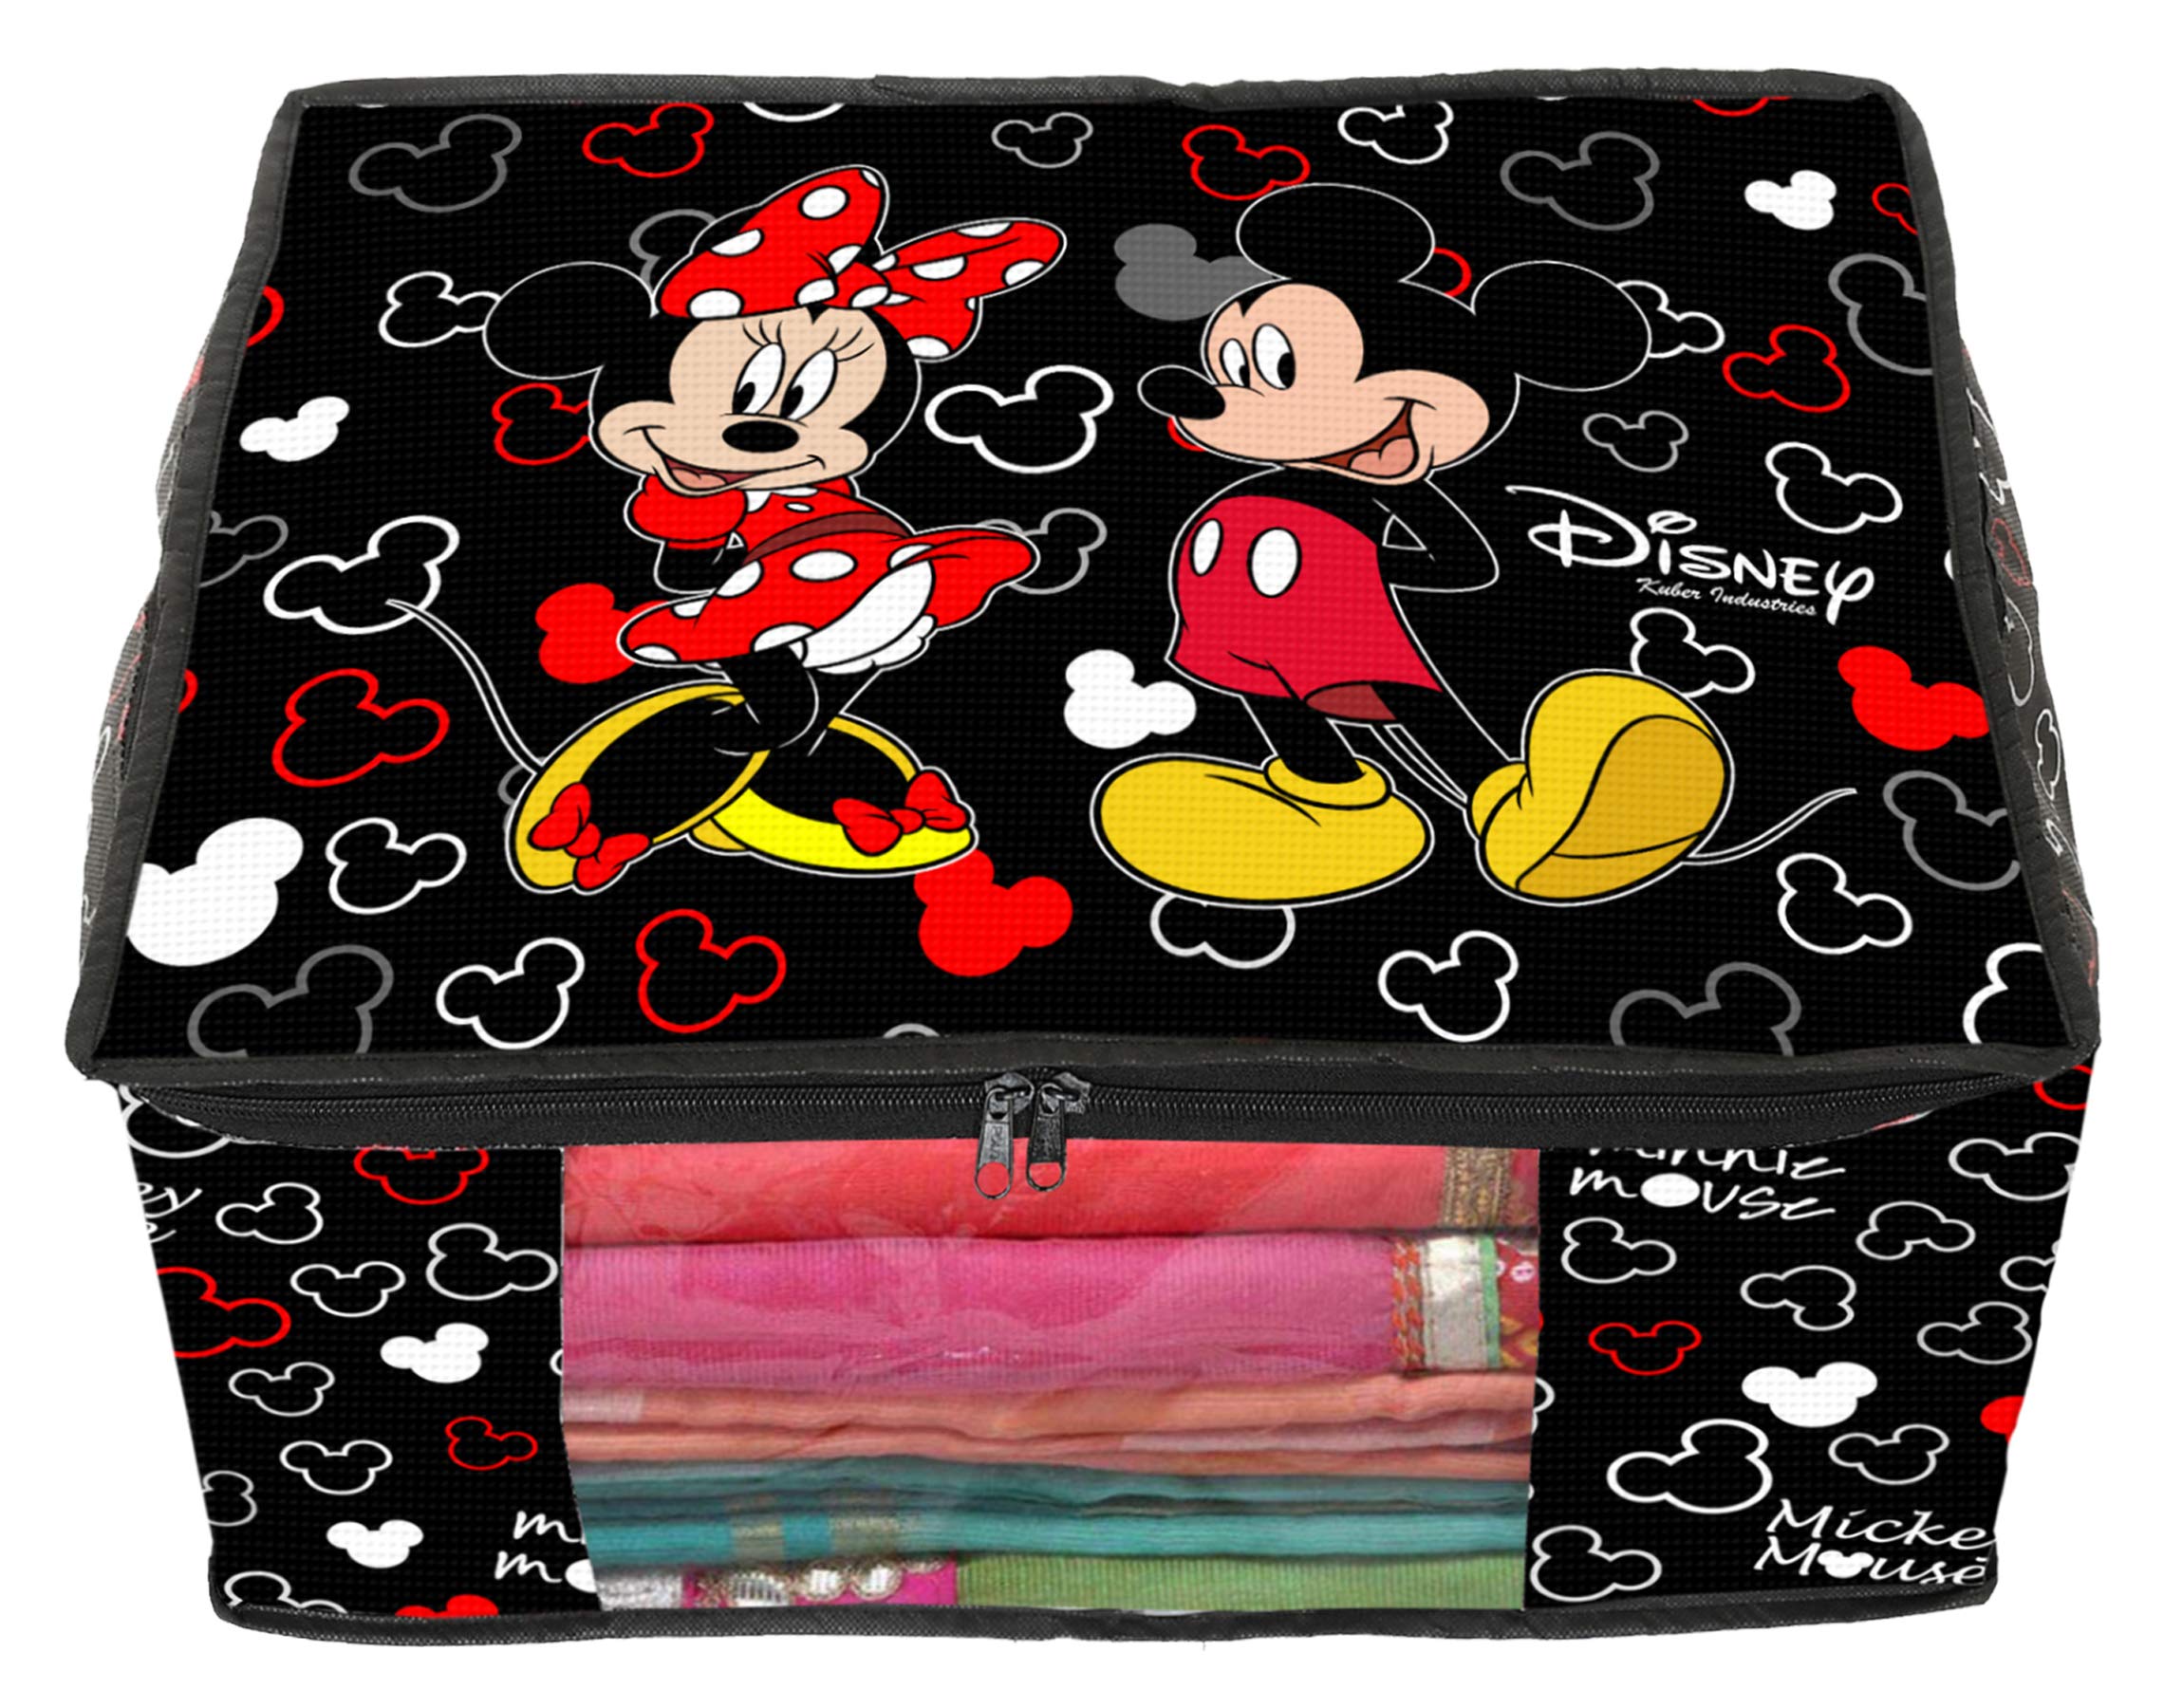 Kuber Industries Disney Mickey Print 6 Piece Non Woven Fabric Saree Cover/Clothes Organiser For Wardrobe Set with Transparent Window, Extra Large (Black) -HS_35_KUBMARTS18131